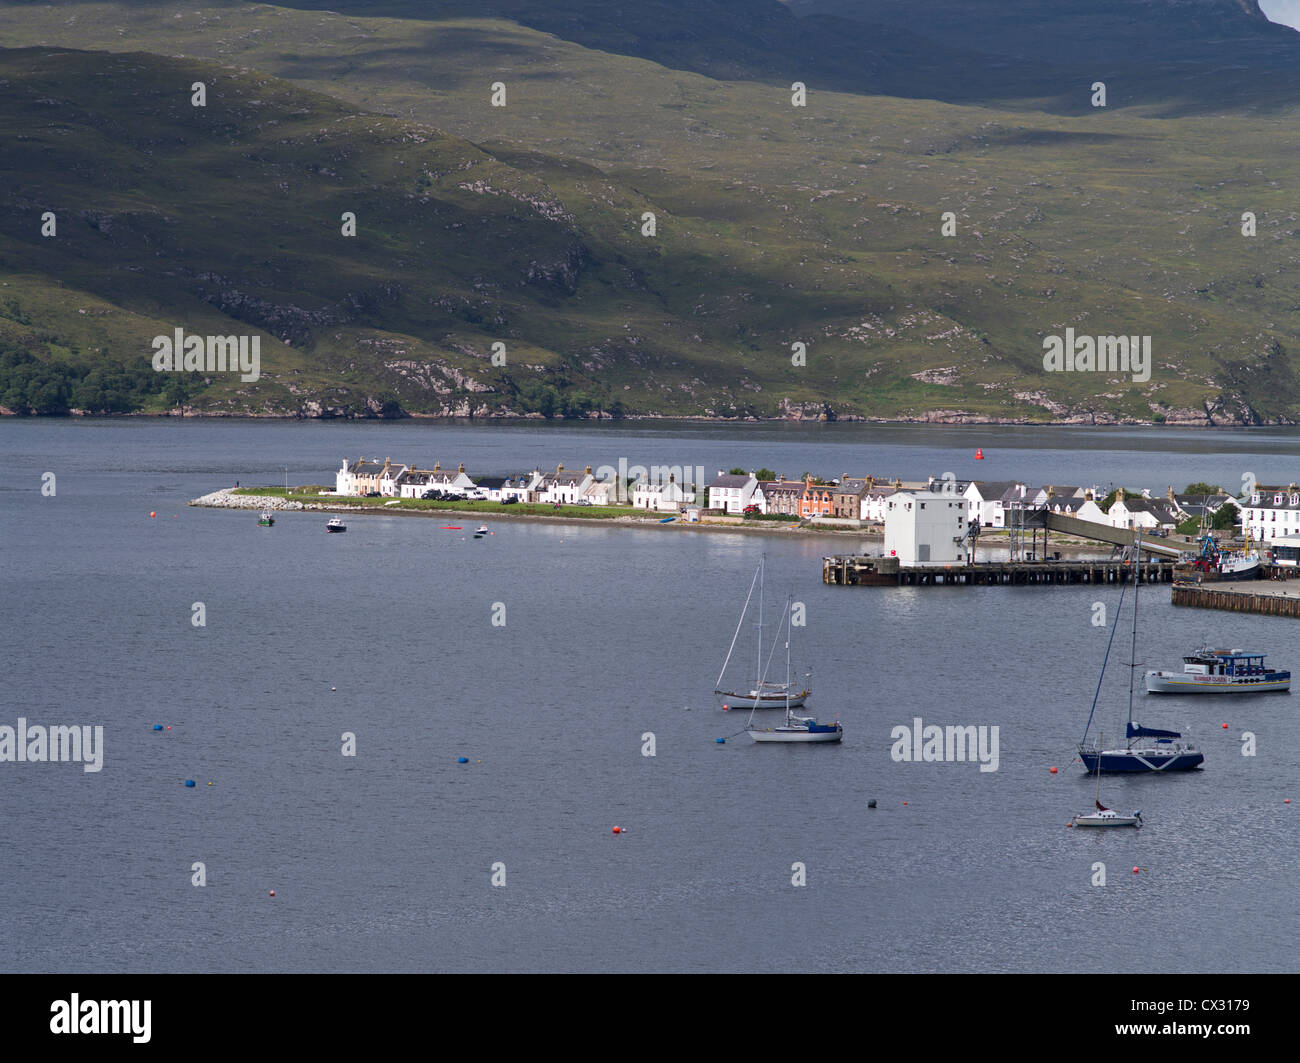 dh loch broom ULLAPOOL ROSS CROMARTY Loch Broom yachts in bay Ullapool town harbour scotland yacht Stock Photo